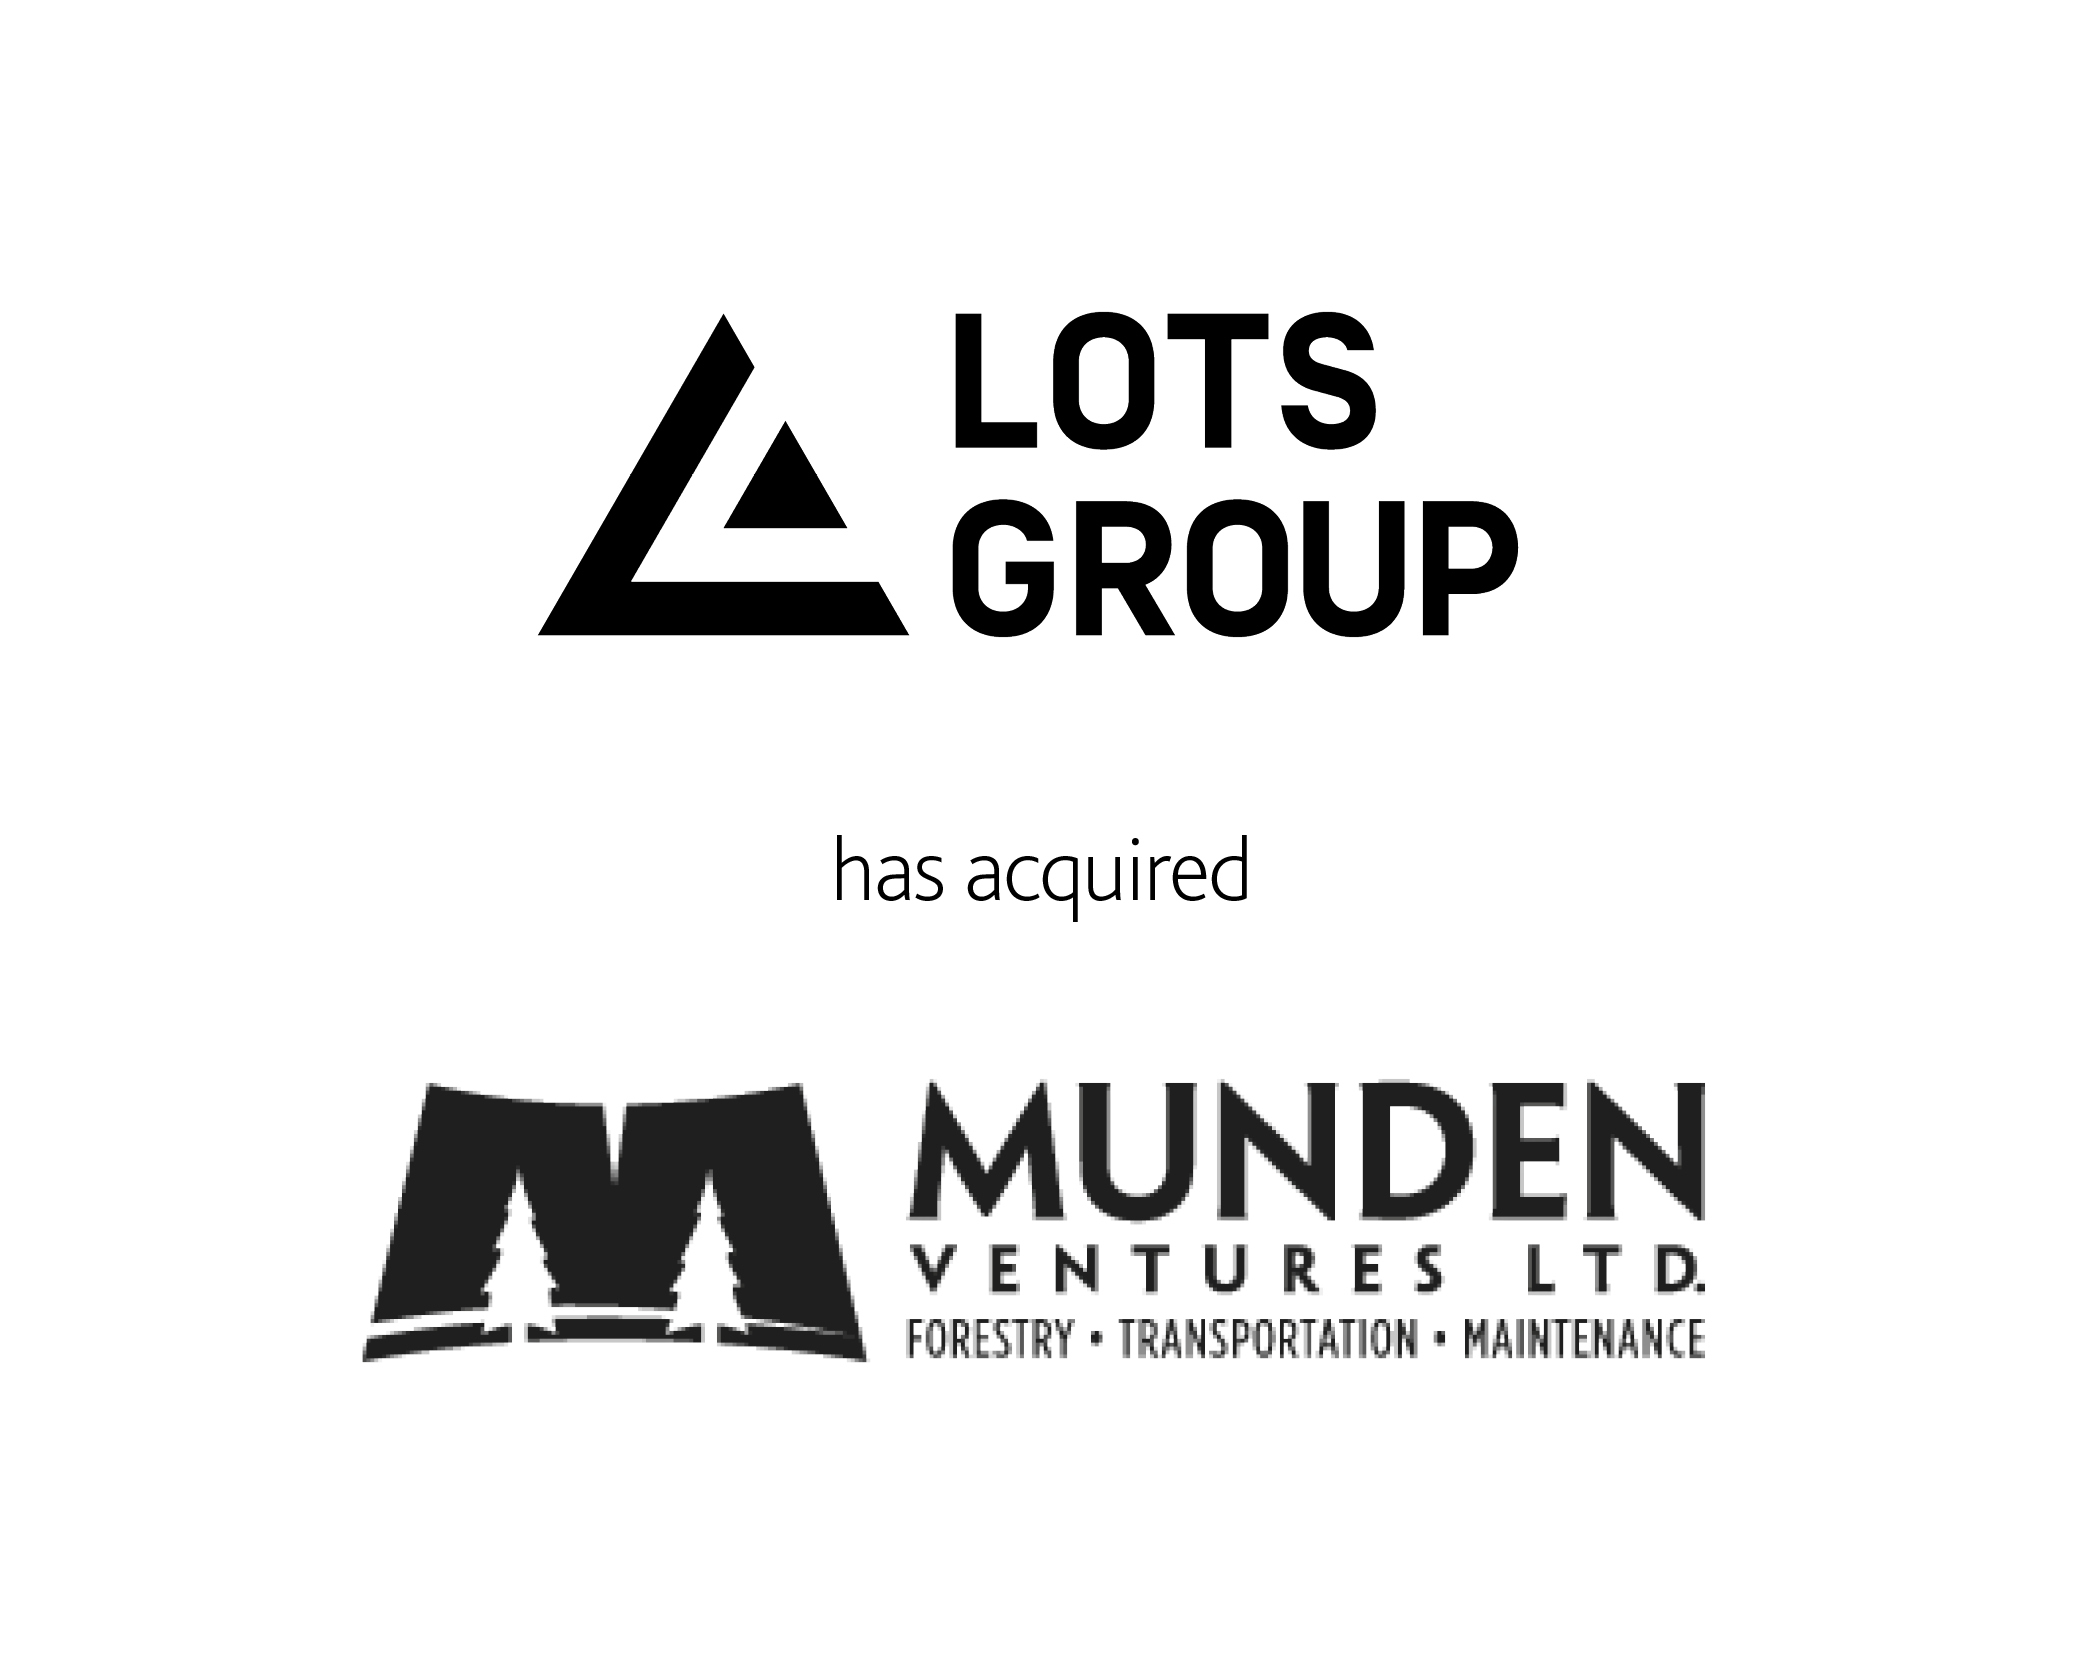 LOTS Group has acquired Munden Group